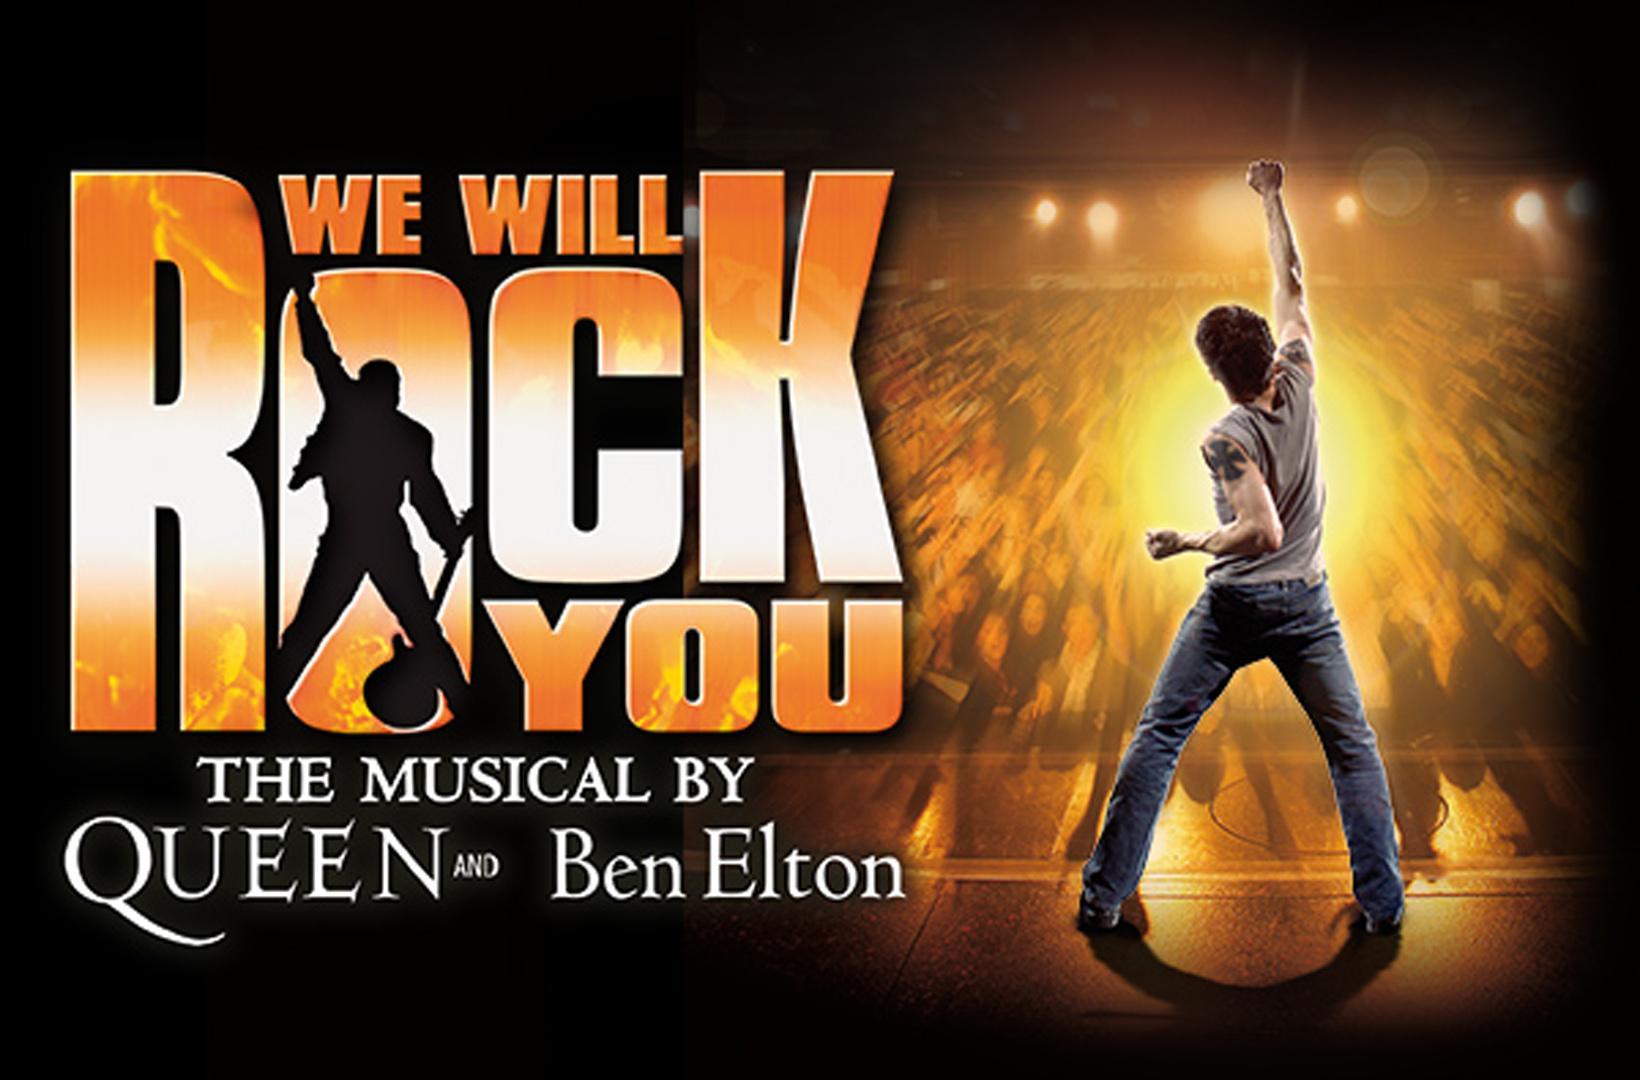 We Will Rock You.jpg (140 KB)